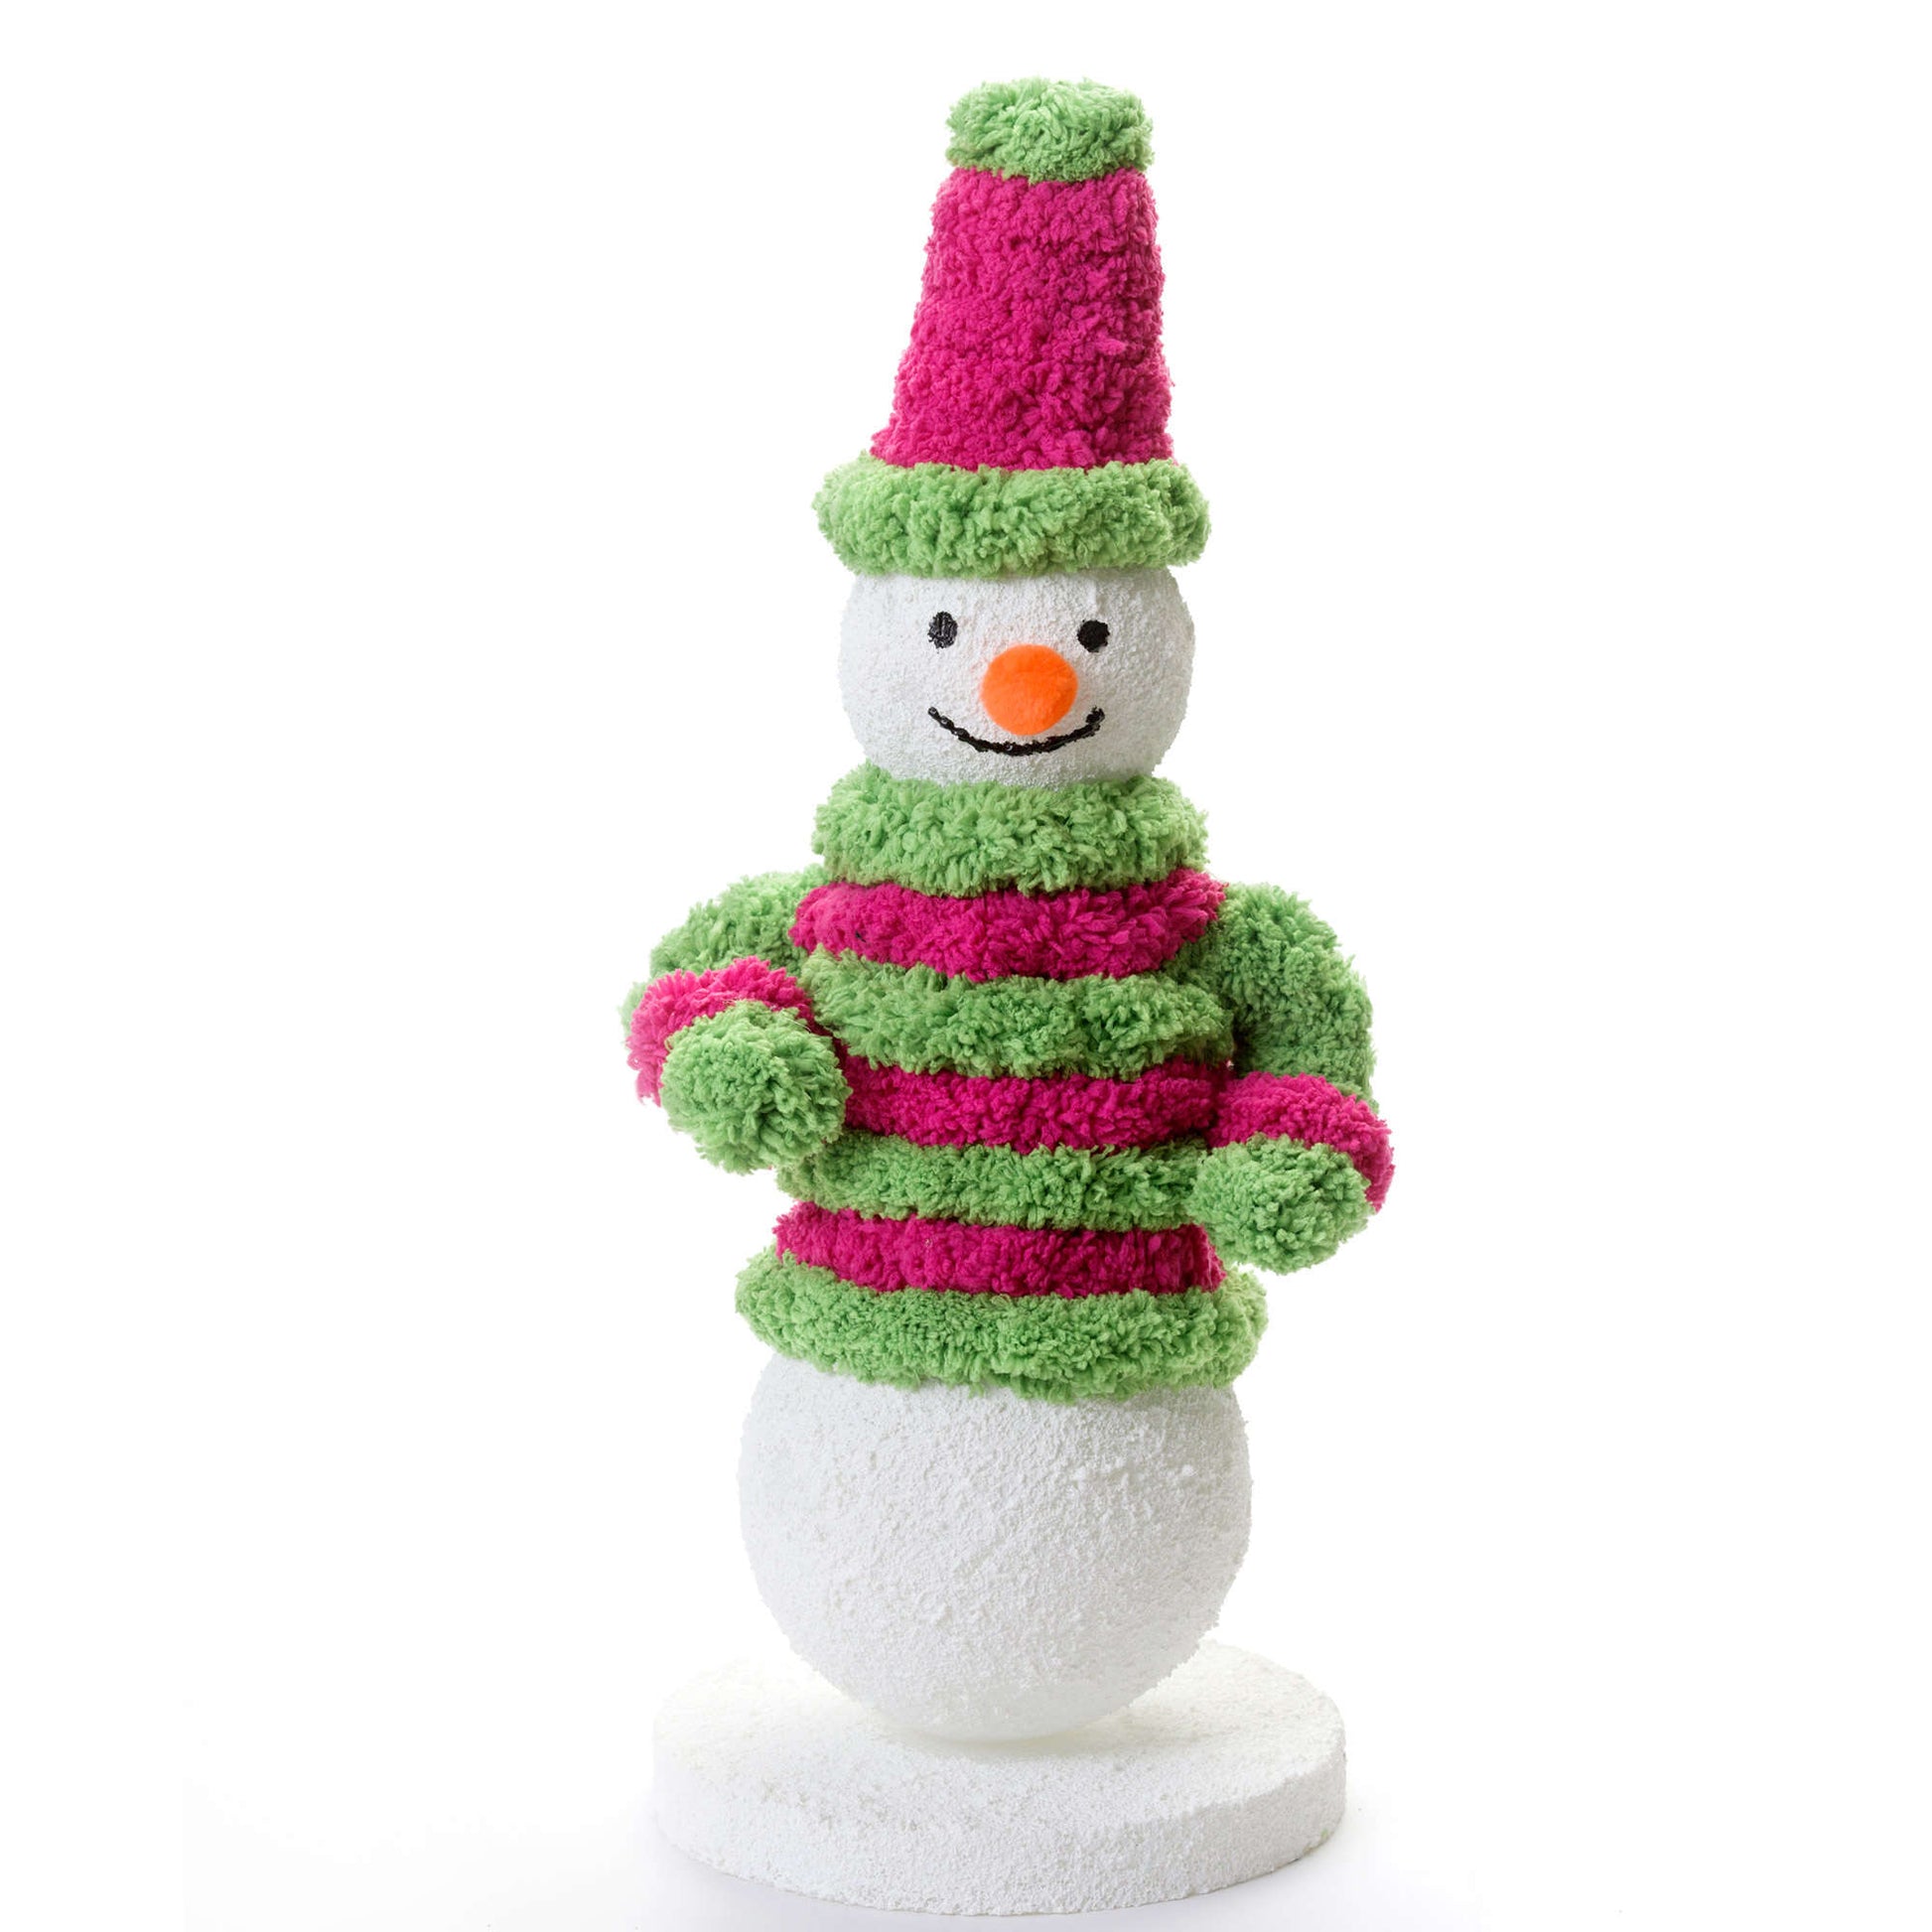 Free Red Heart Craft Mr. Doodle Snowman Pattern